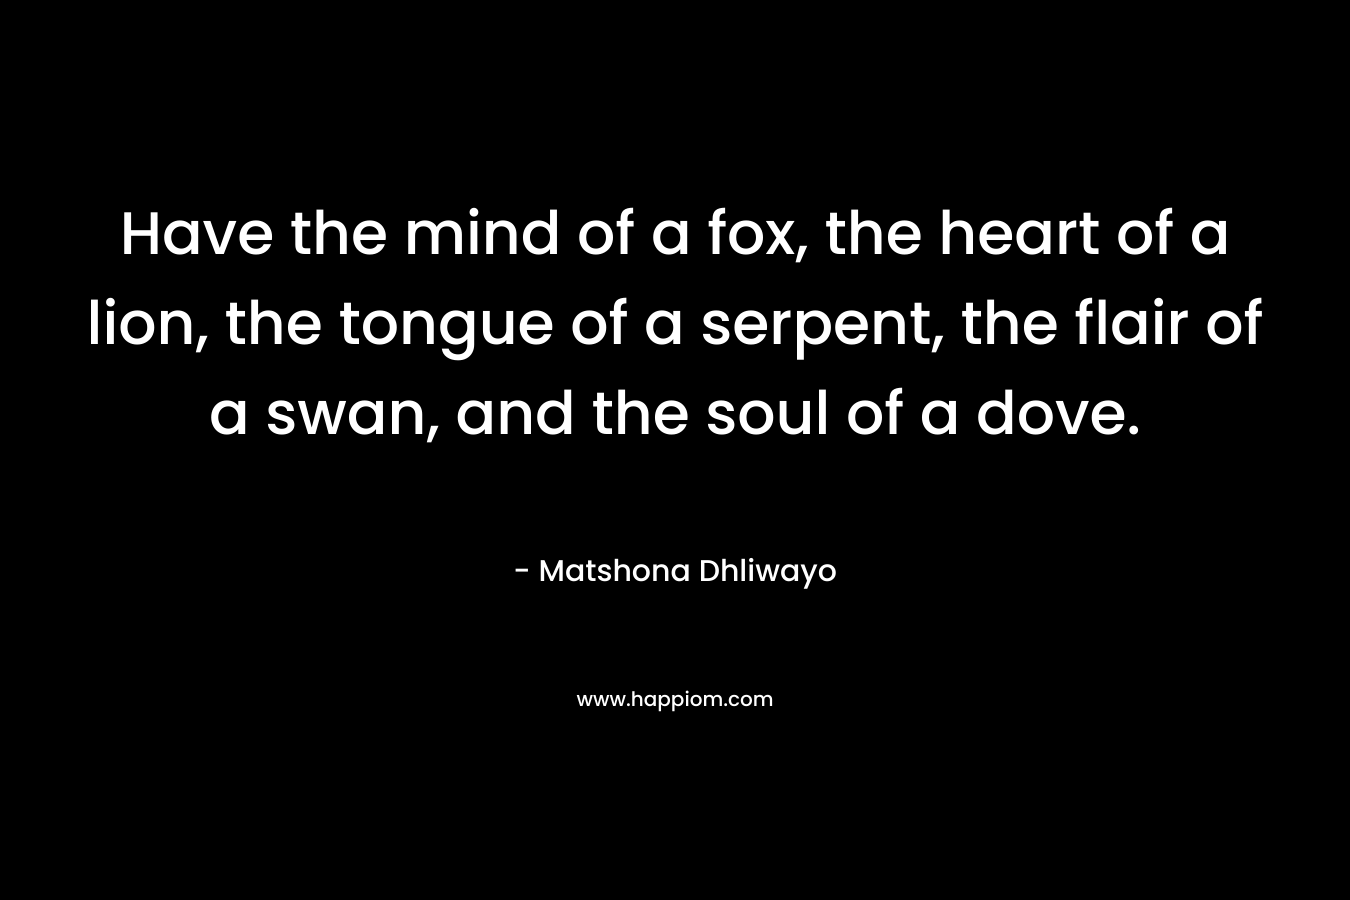 Have the mind of a fox, the heart of a lion, the tongue of a serpent, the flair of a swan, and the soul of a dove. – Matshona Dhliwayo